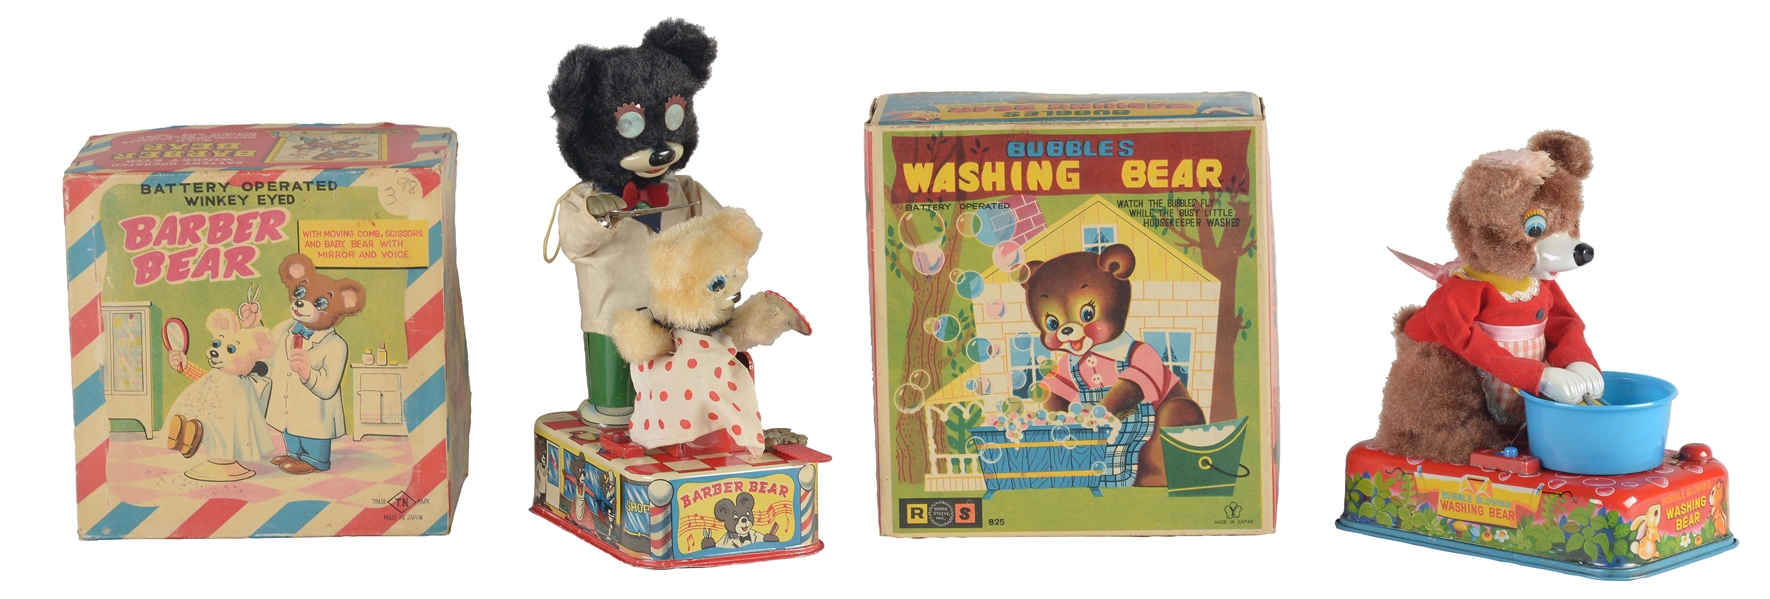 LOT OF 2: TIN LITHO AND FUR COVERED BATTERY OPERATED BEAR TOYS.